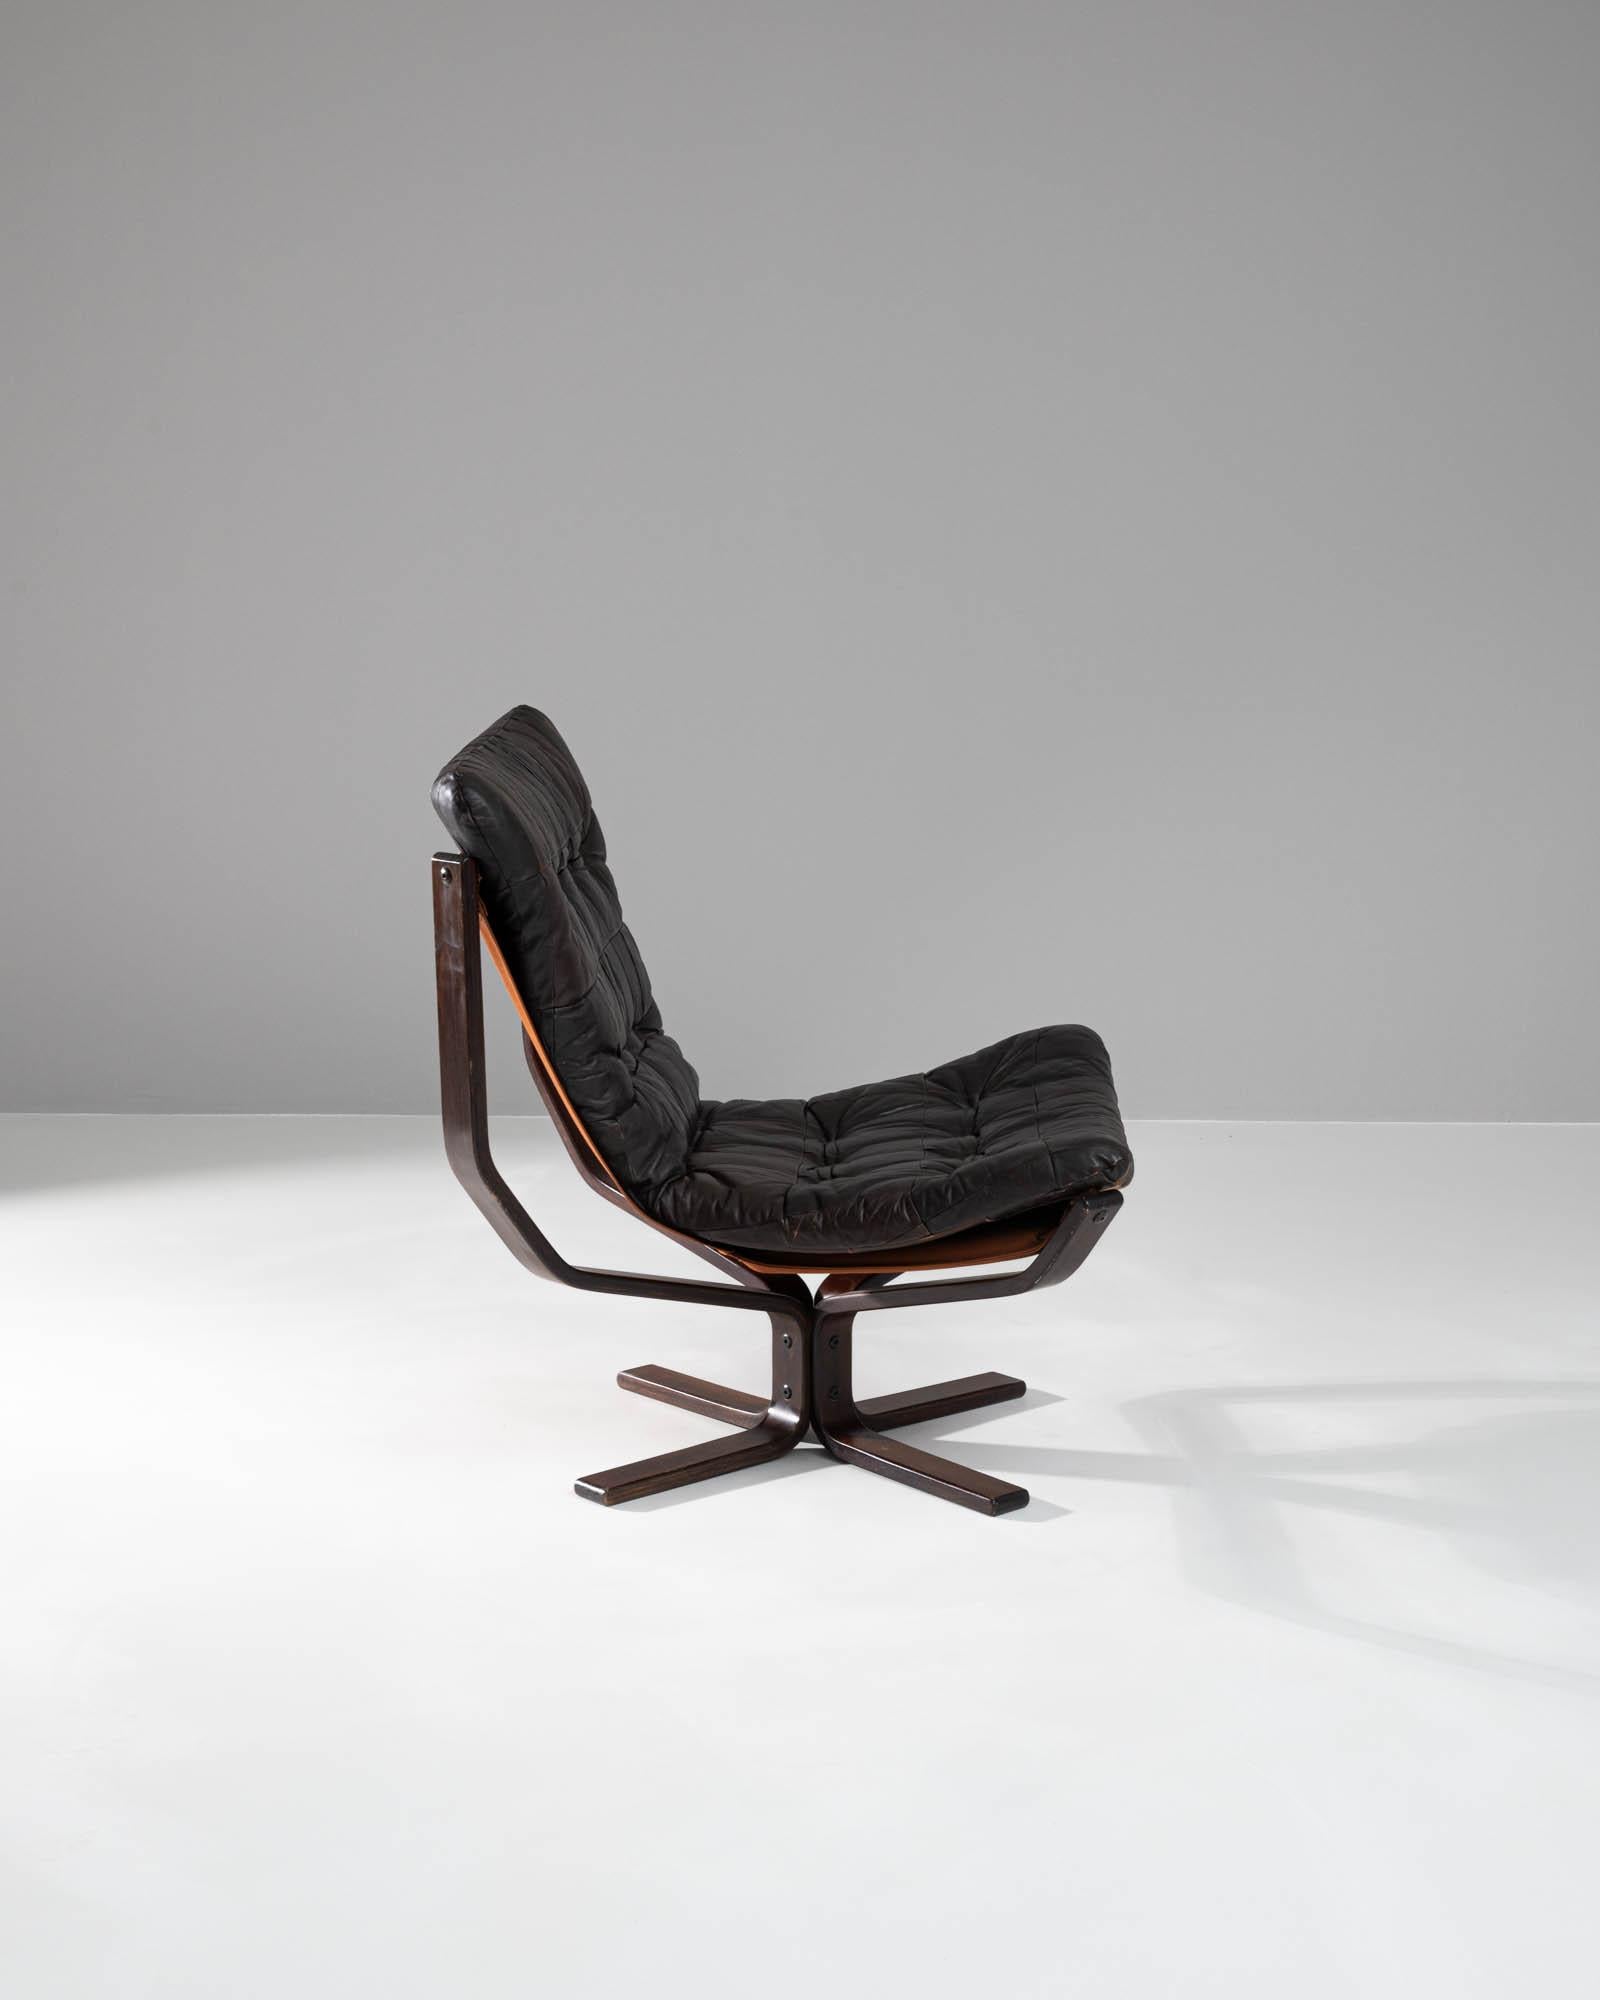 20th Century Danish Wooden & Leather Chair 2